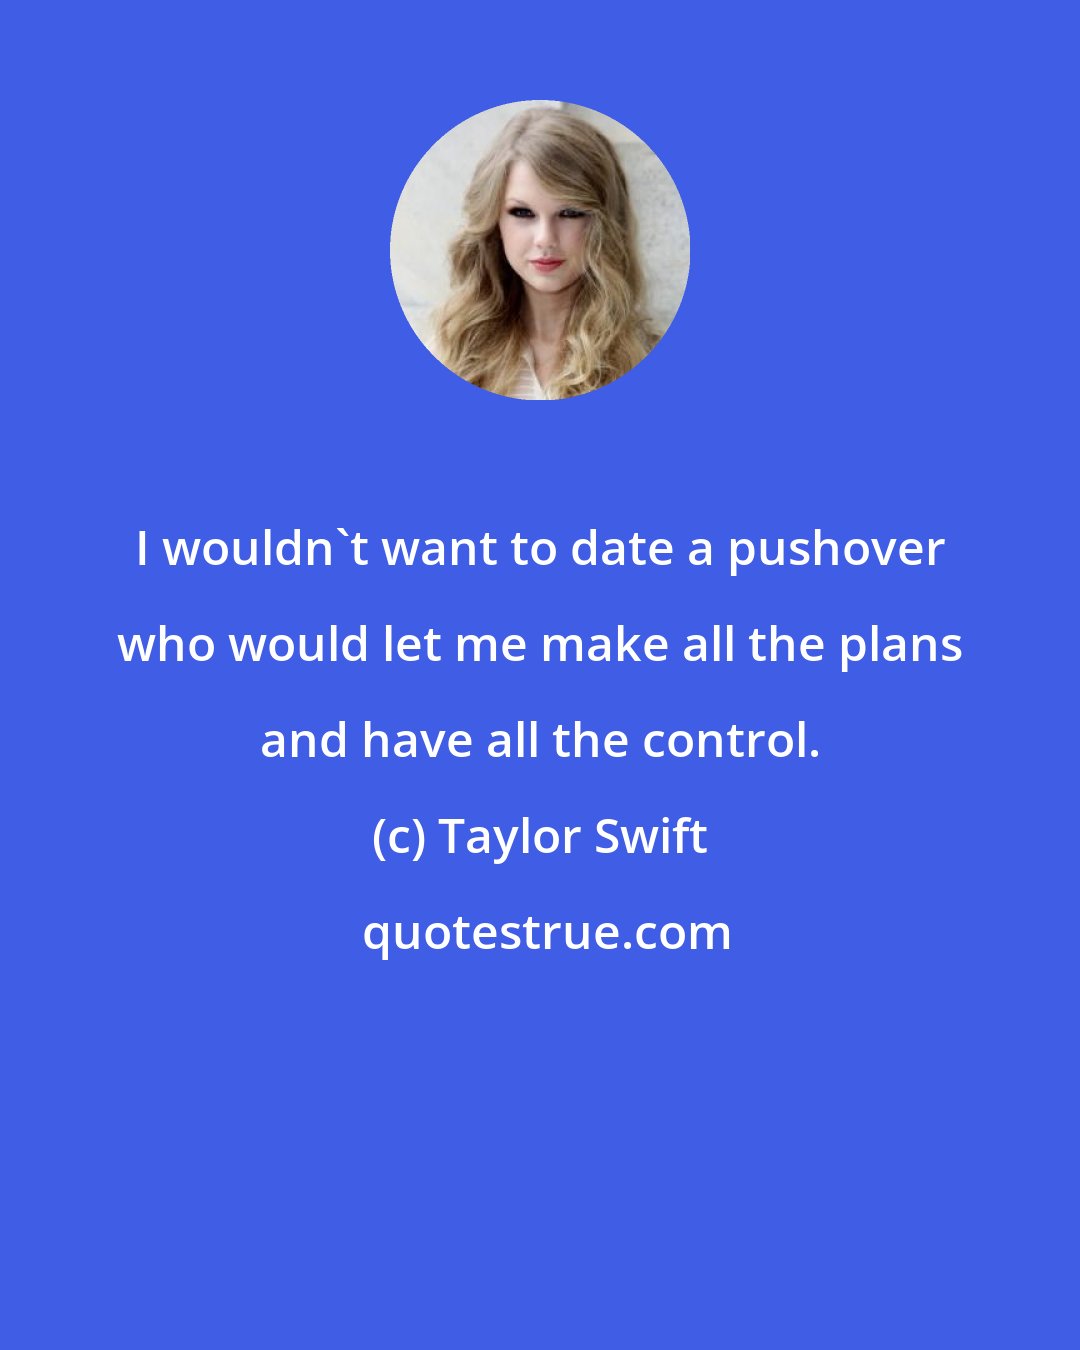 Taylor Swift: I wouldn't want to date a pushover who would let me make all the plans and have all the control.